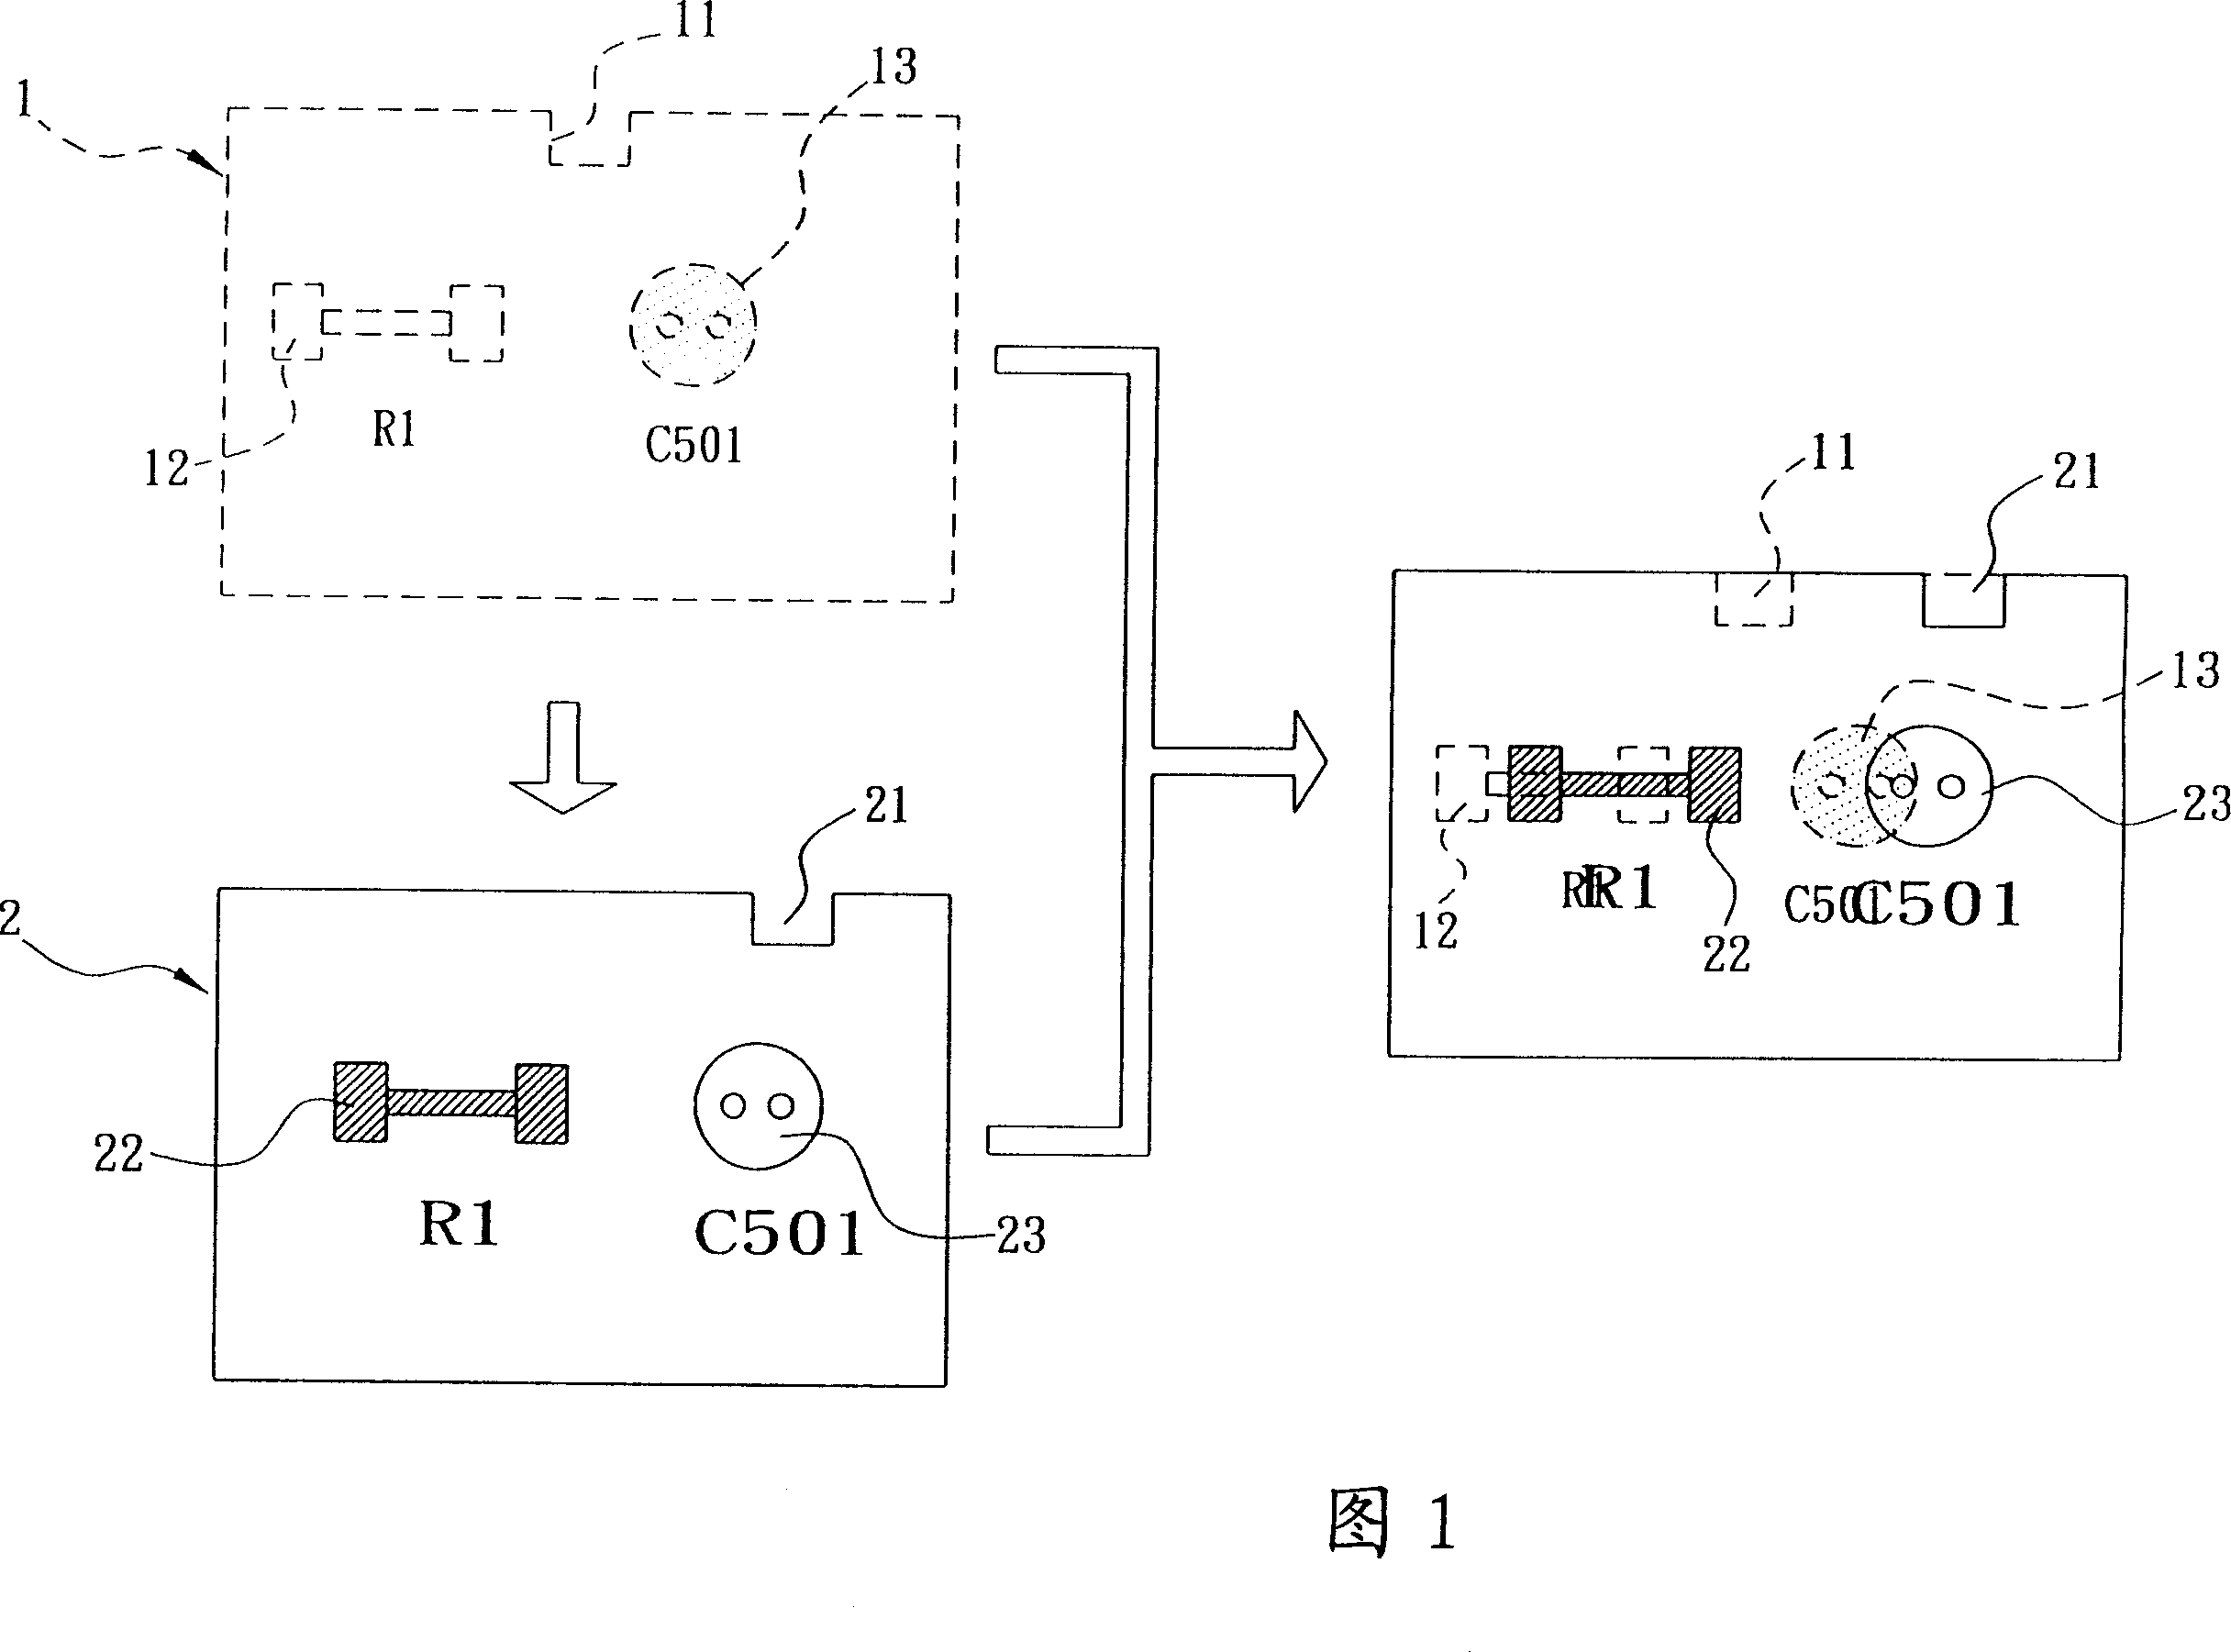 Comparision method for automatically comparing circuit design diagram with its modification conditions